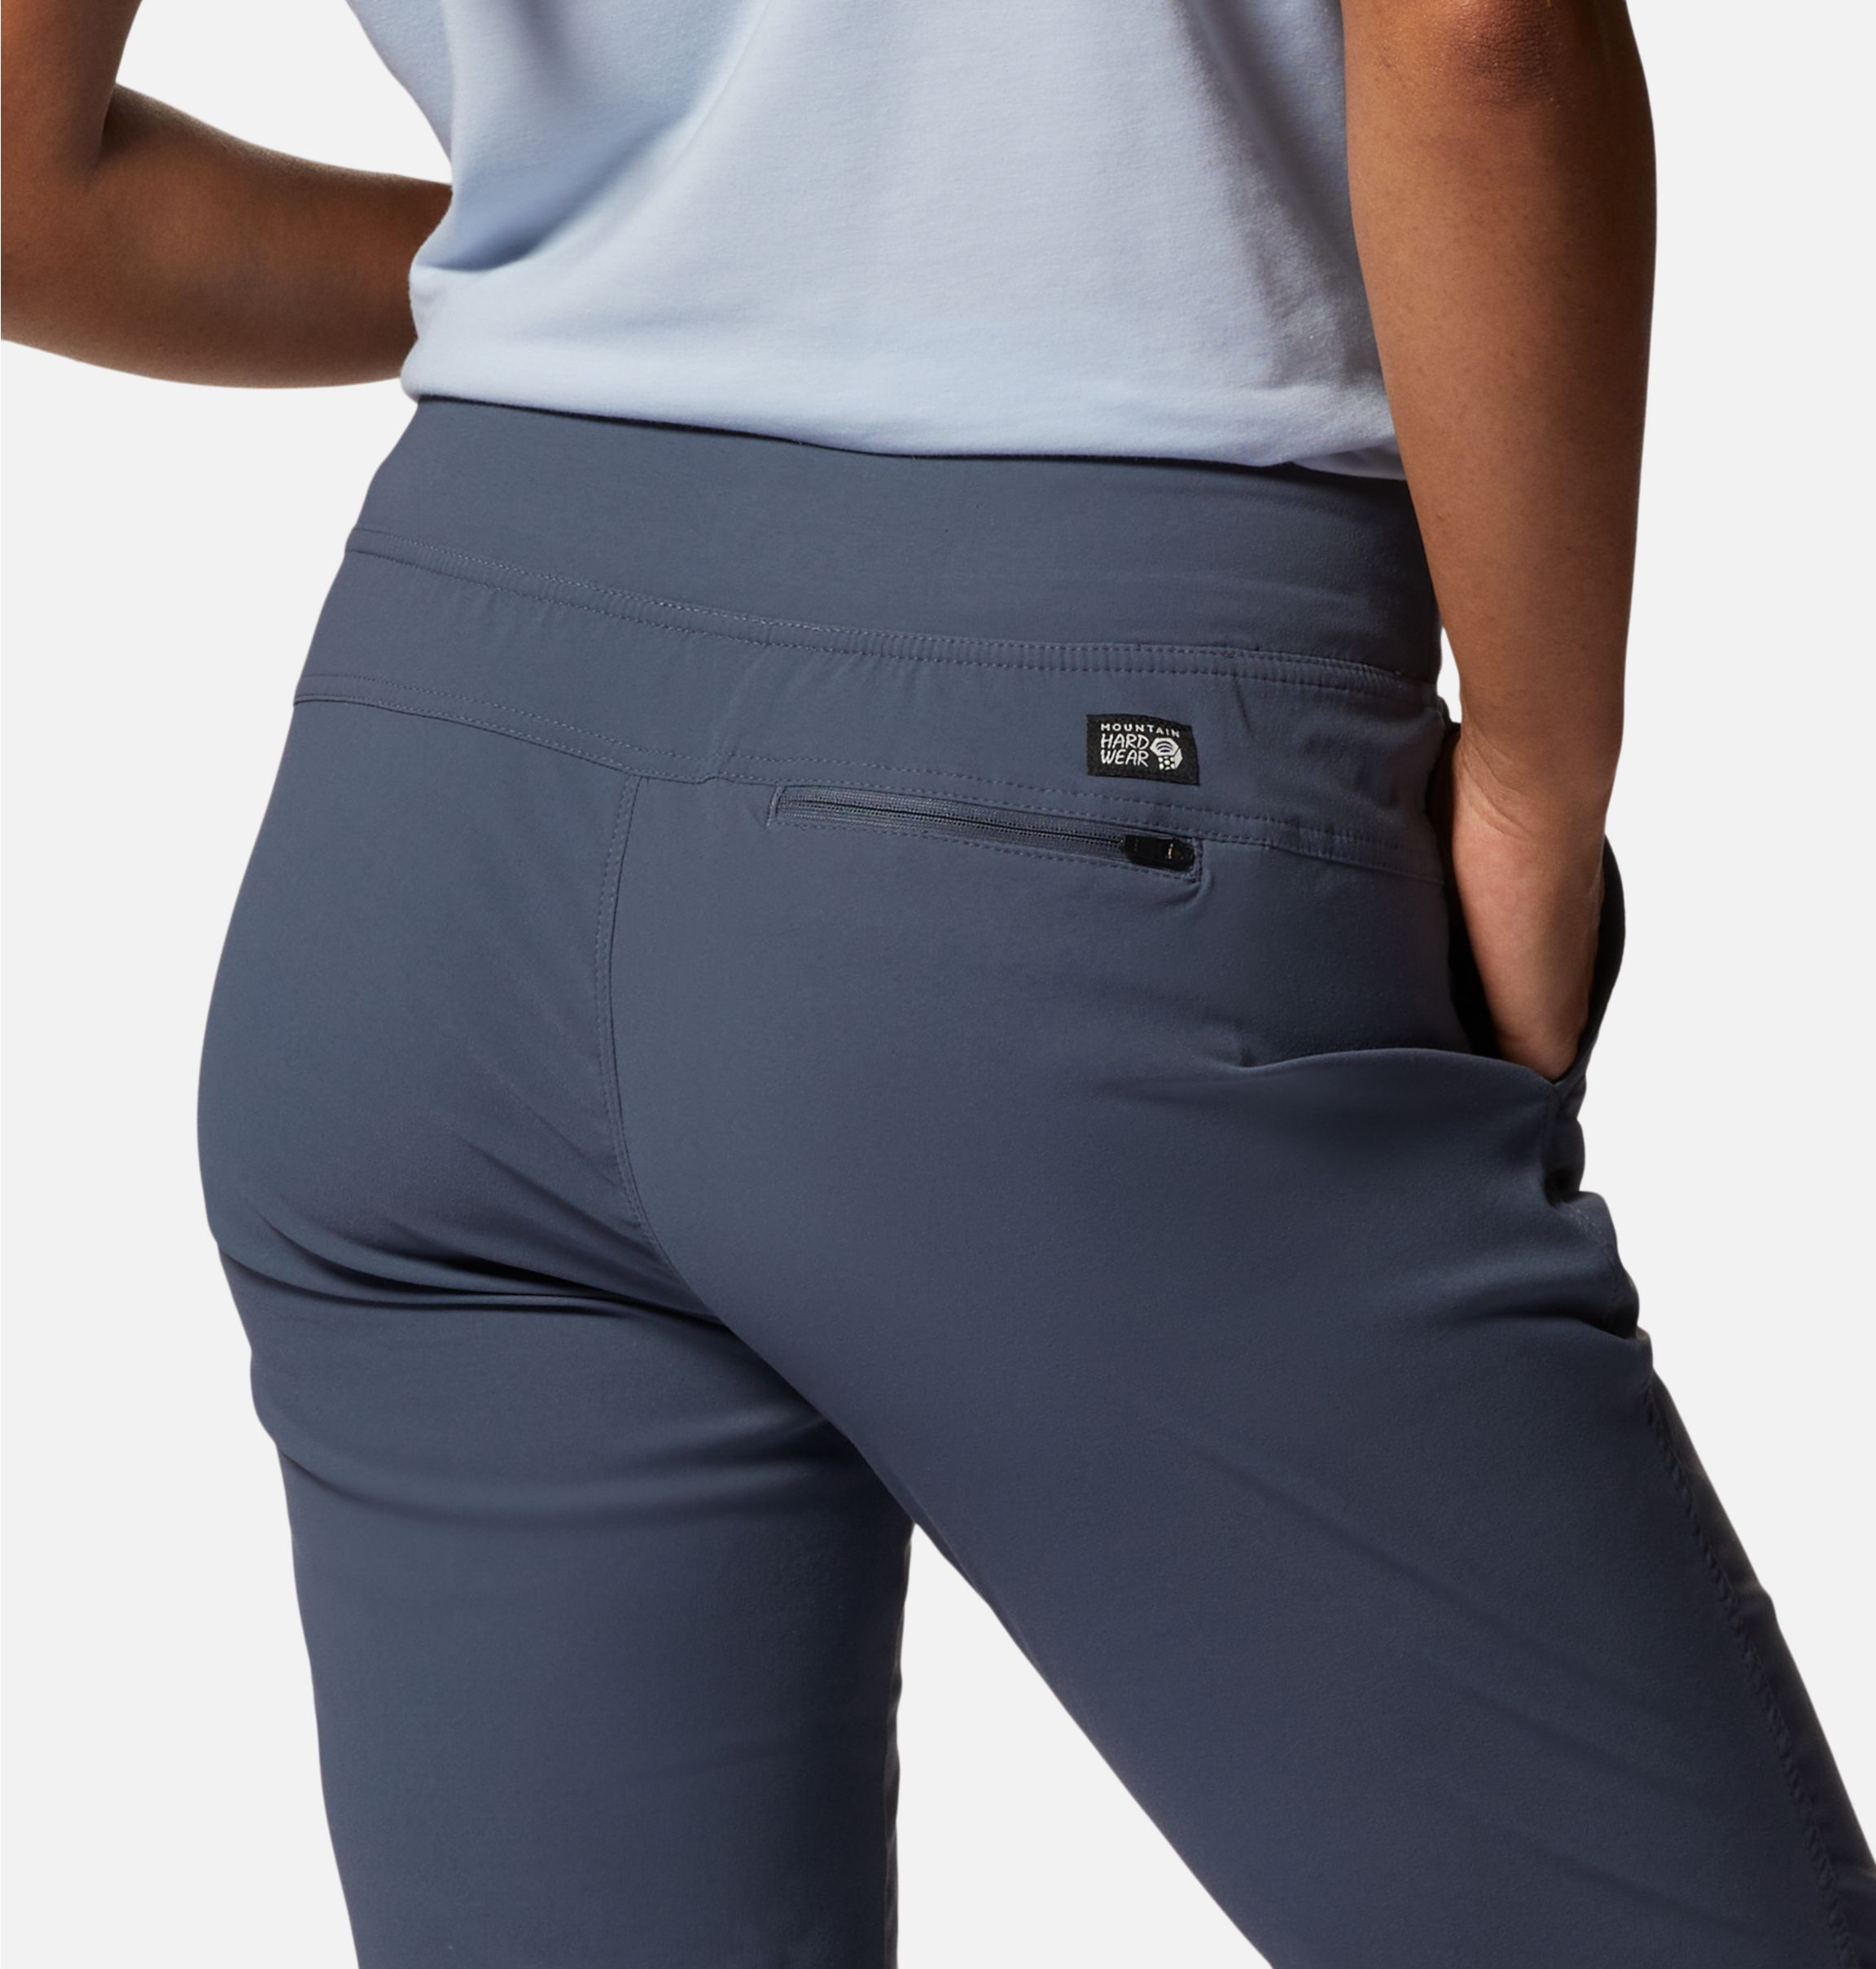 M7368 Women's Eon Sport Comfy Pull on Pant